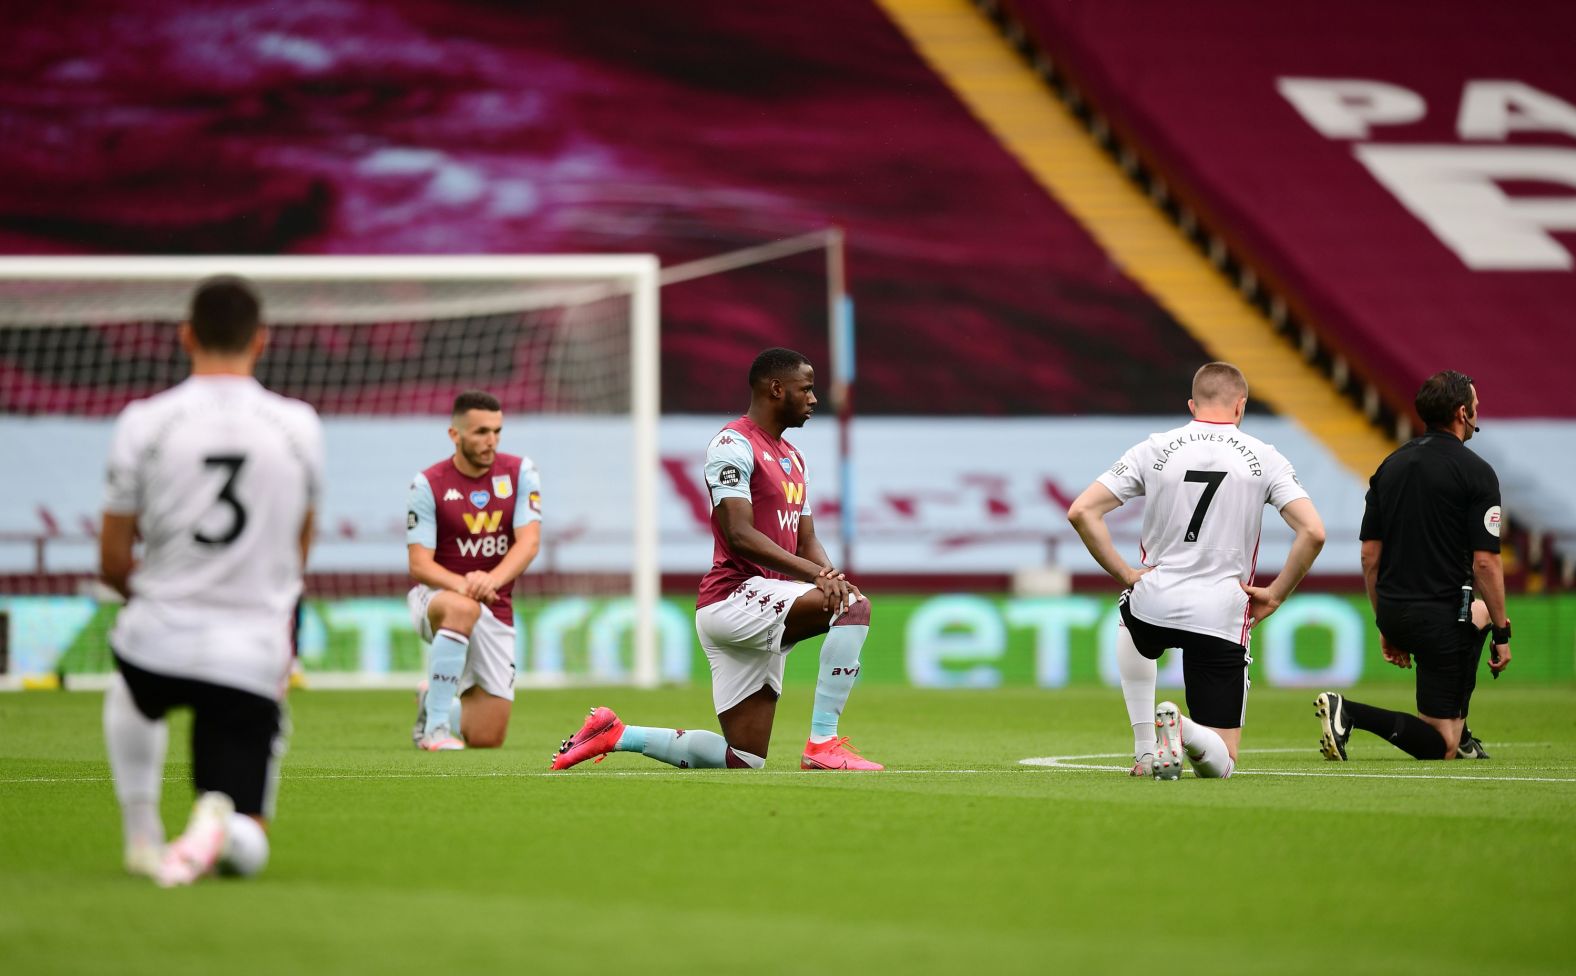 The Black Lives Matter protests haven't been limited to just North America. Here, professional soccer players from Aston Villa and Sheffield United take a knee as their match kicked off in Birmingham, England, on June 17. Premier League teams sported the words "Black Lives Matter" on the back of their jerseys when <a href="index.php?page=&url=https%3A%2F%2Fwww.cnn.com%2F2020%2F06%2F17%2Ffootball%2Fpremier-league-restart-manchester-city-arsenal-aston-villa-sheffield-united-spt-intl%2Findex.html" target="_blank">their seasons resumed.</a>